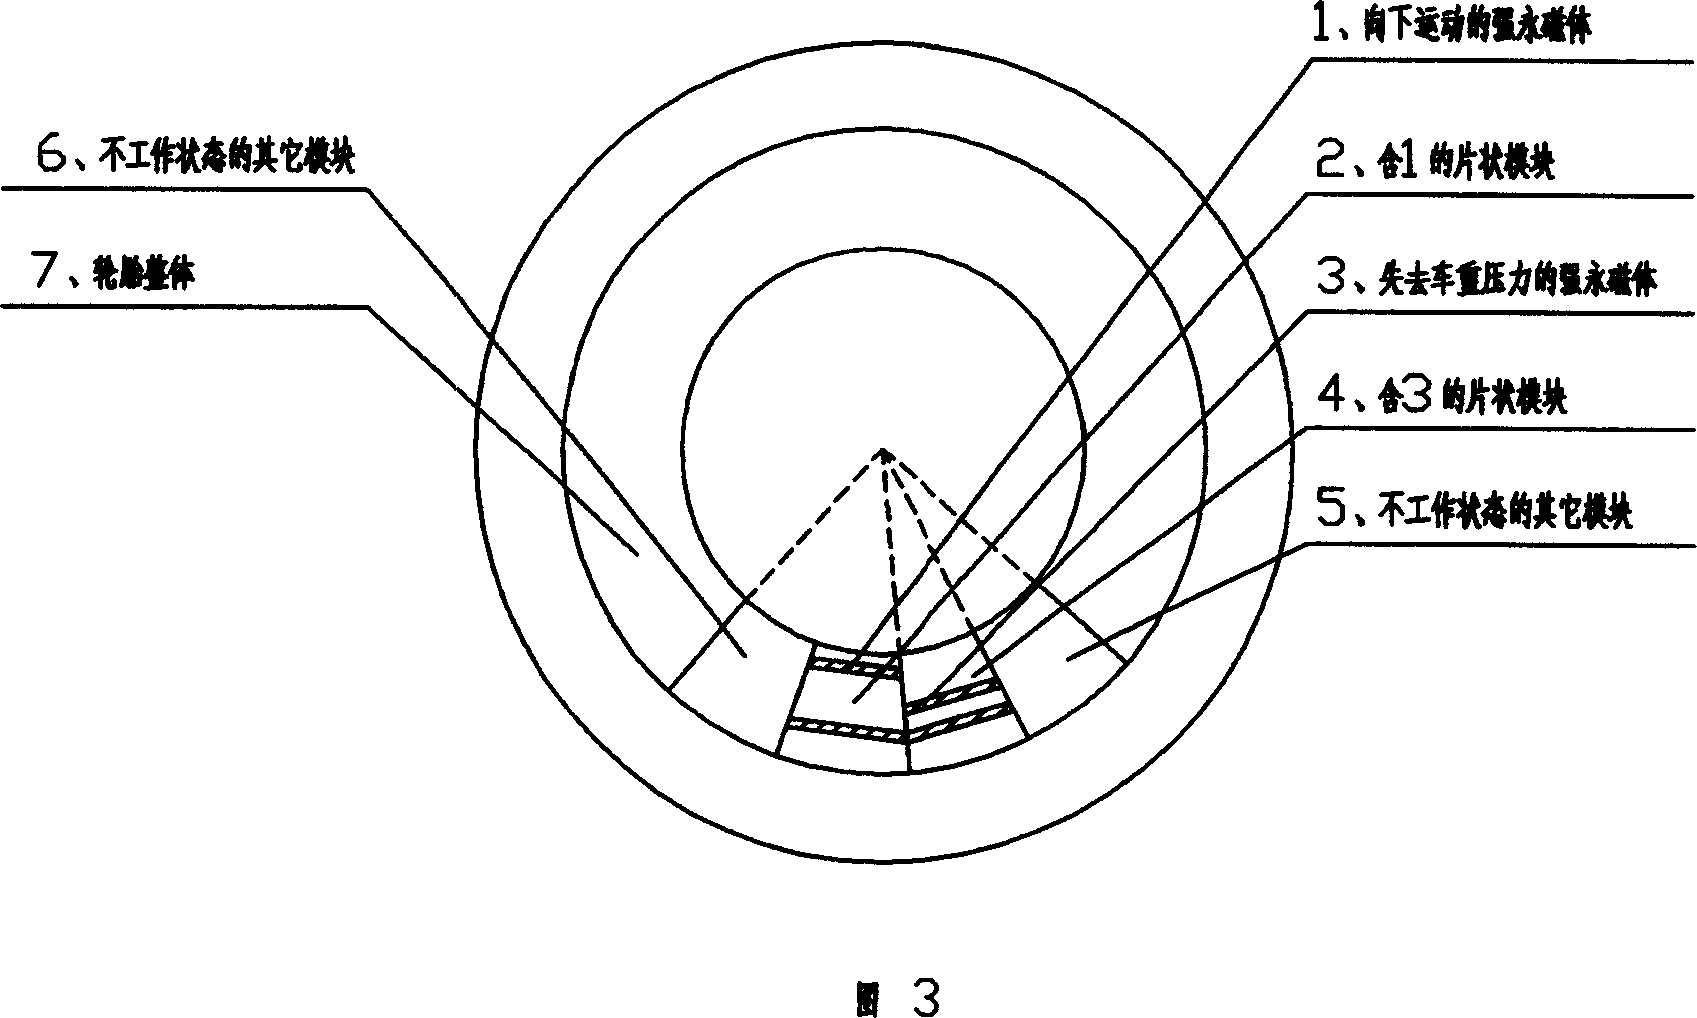 Piston reciprocating magnetic repulsion generating (electric) module and its combined application system